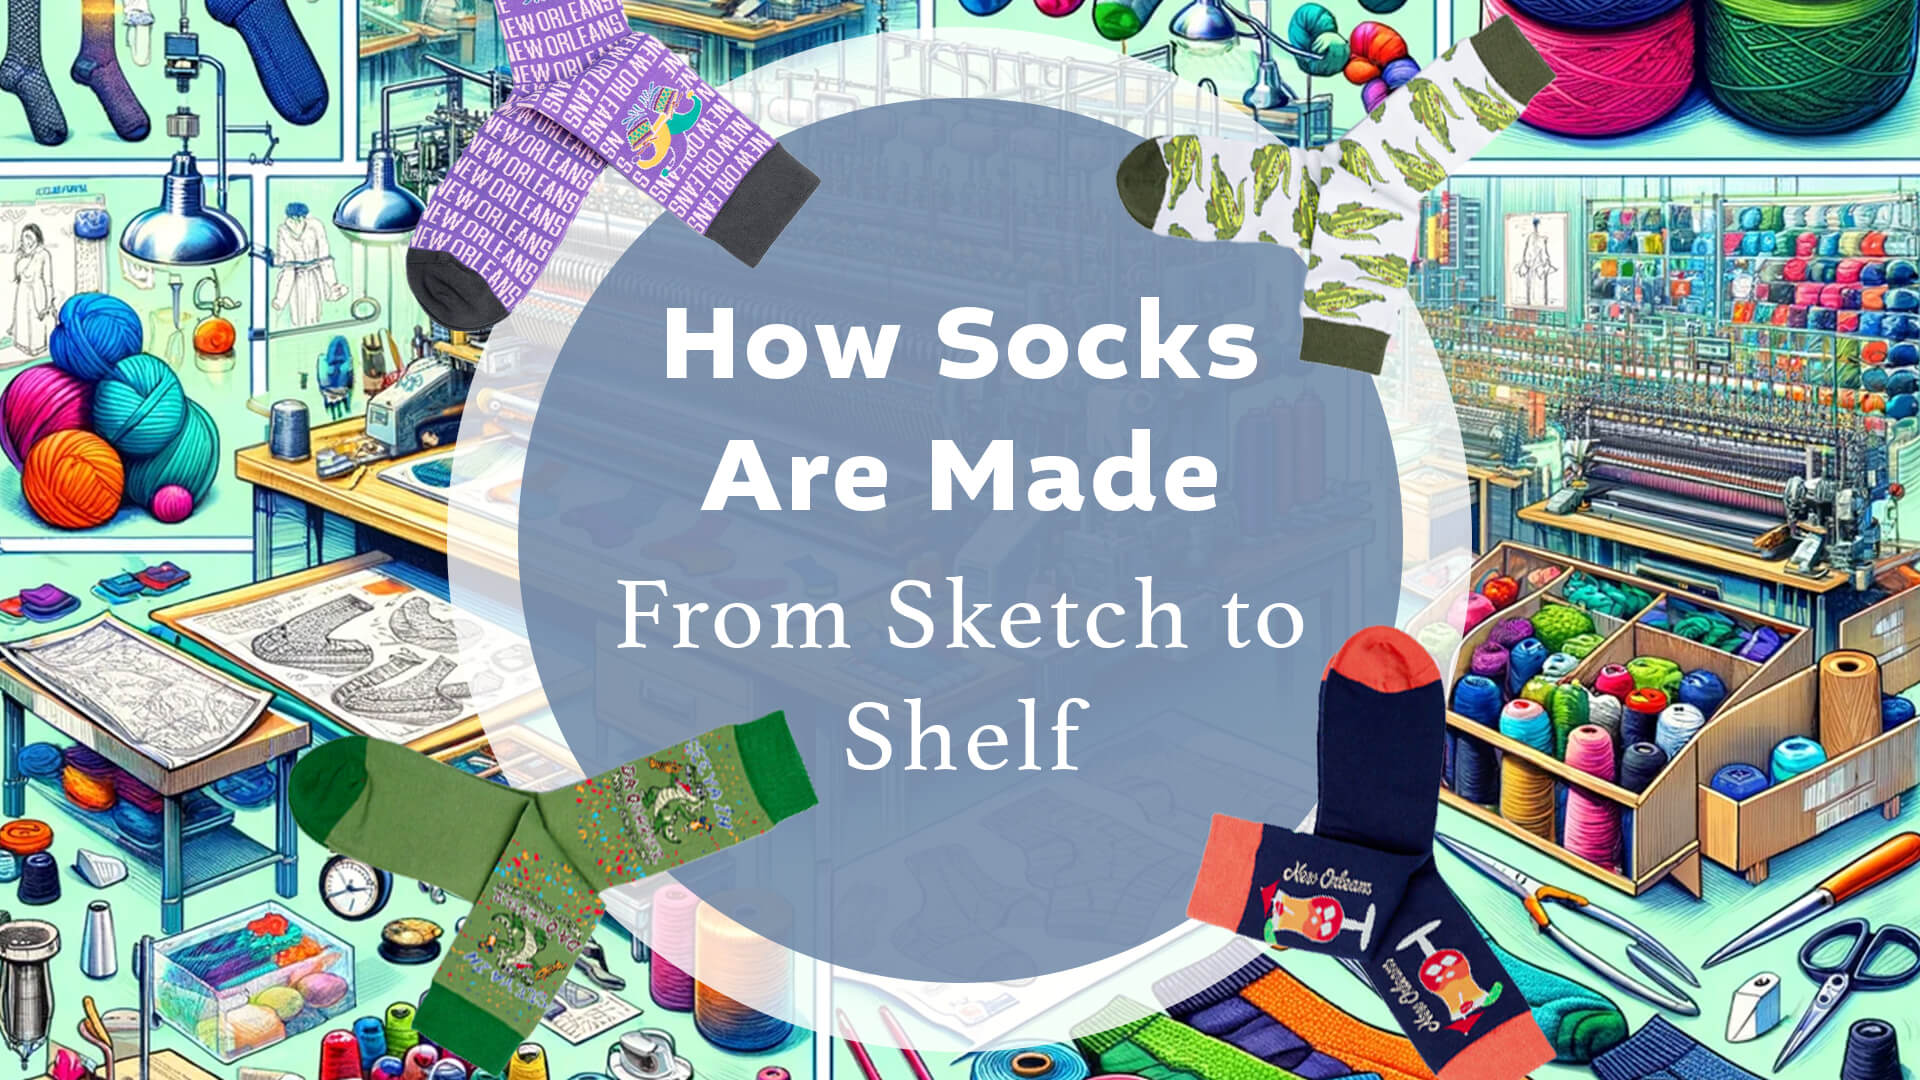 How Socks Are Made: From Sketch to Shelf